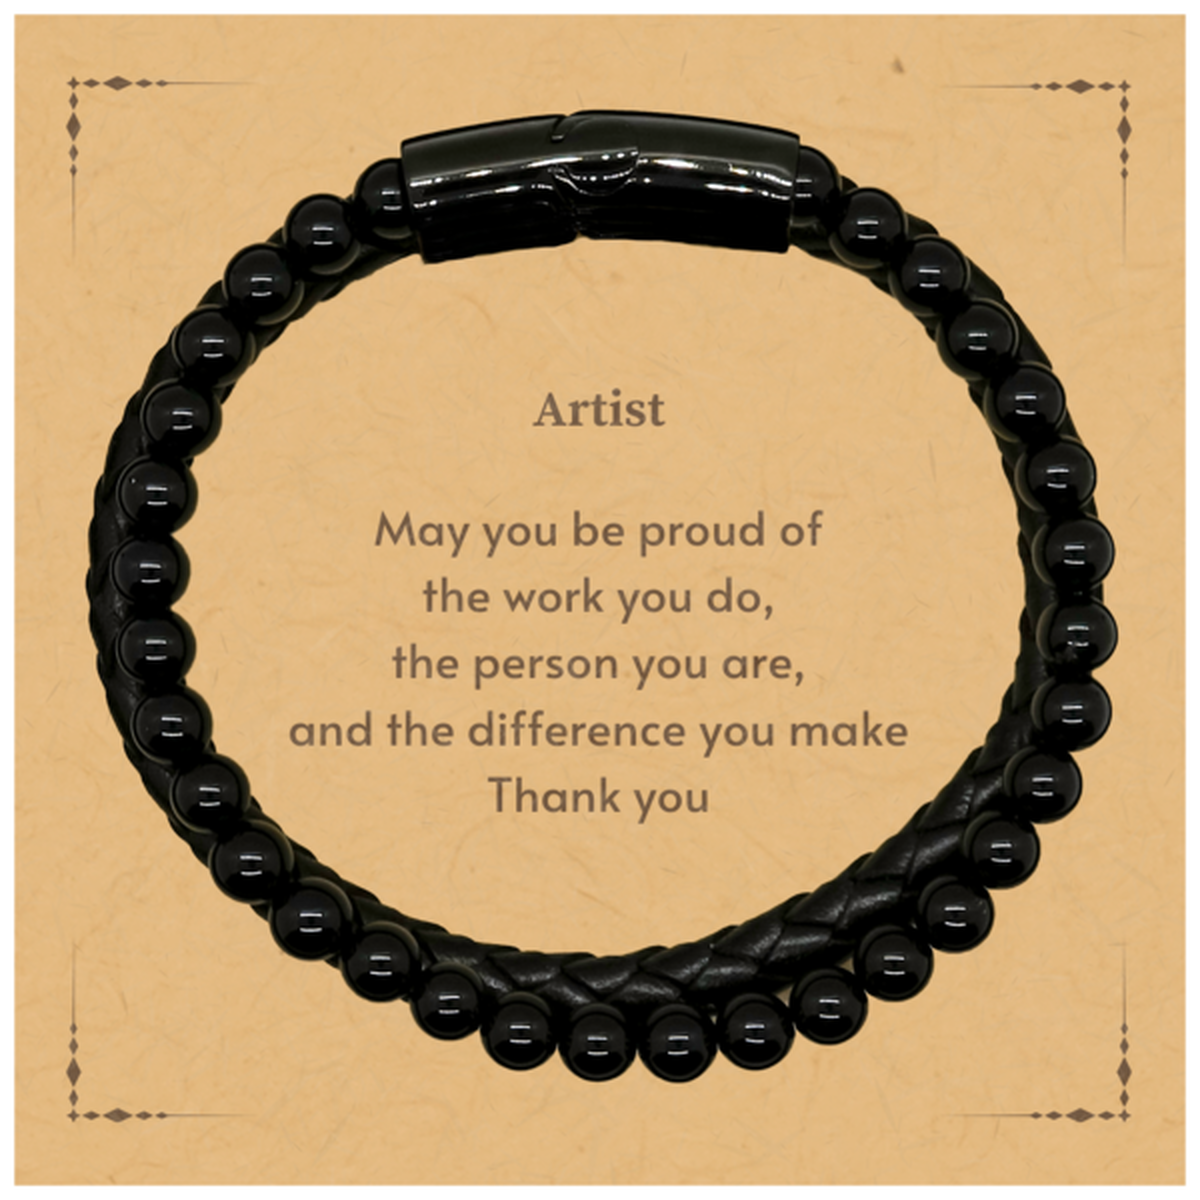 Heartwarming Stone Leather Bracelets Retirement Coworkers Gifts for Artist, Artist May You be proud of the work you do, the person you are Gifts for Boss Men Women Friends